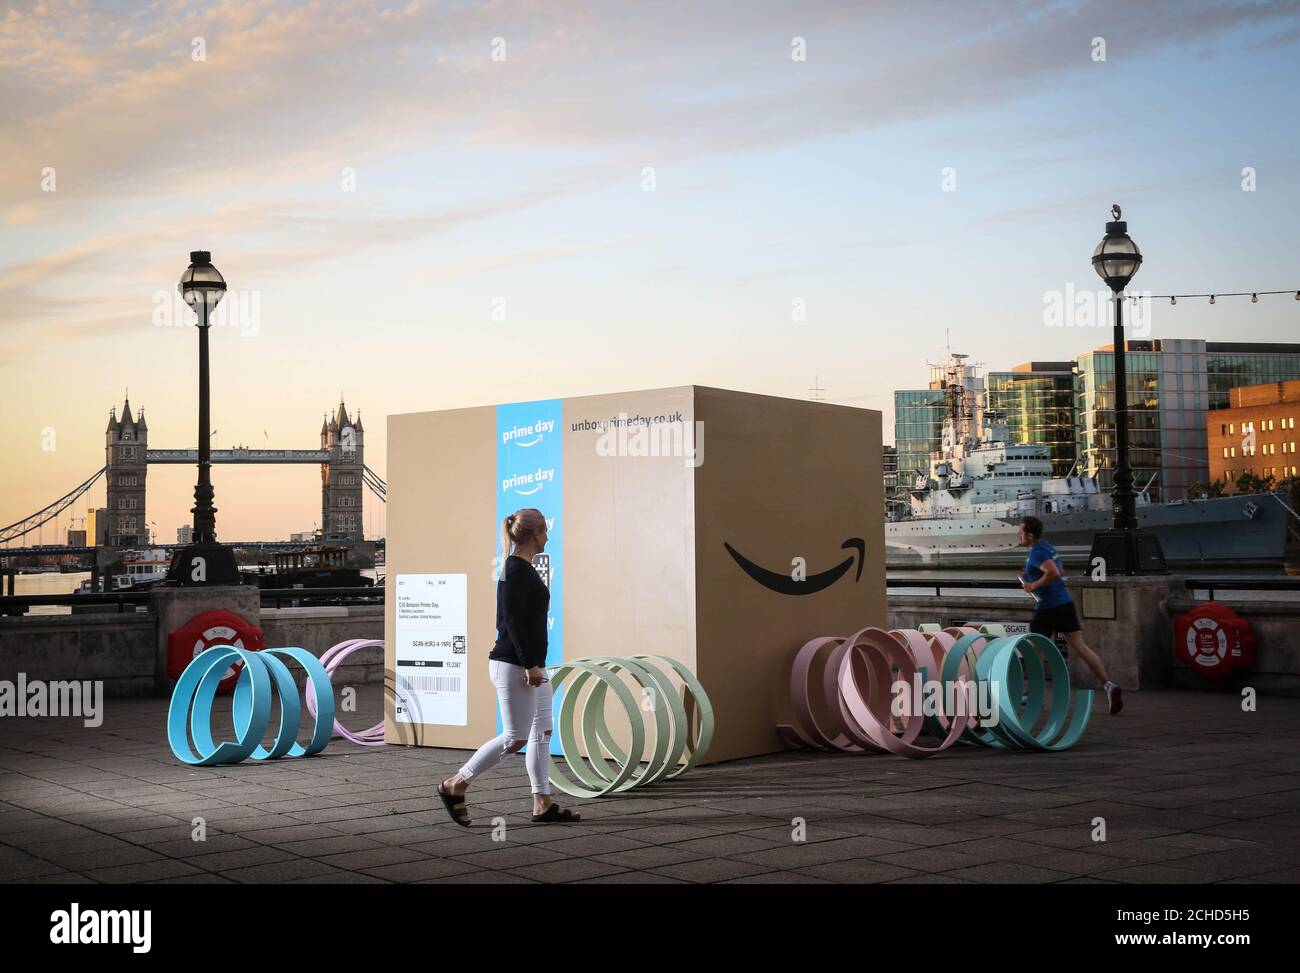 A 10ft x 10ft delivery box arrives in London to announce Amazon Prime Day, which is 36 hours of discounts and deals kicking off midday Monday 16th July. Stock Photo